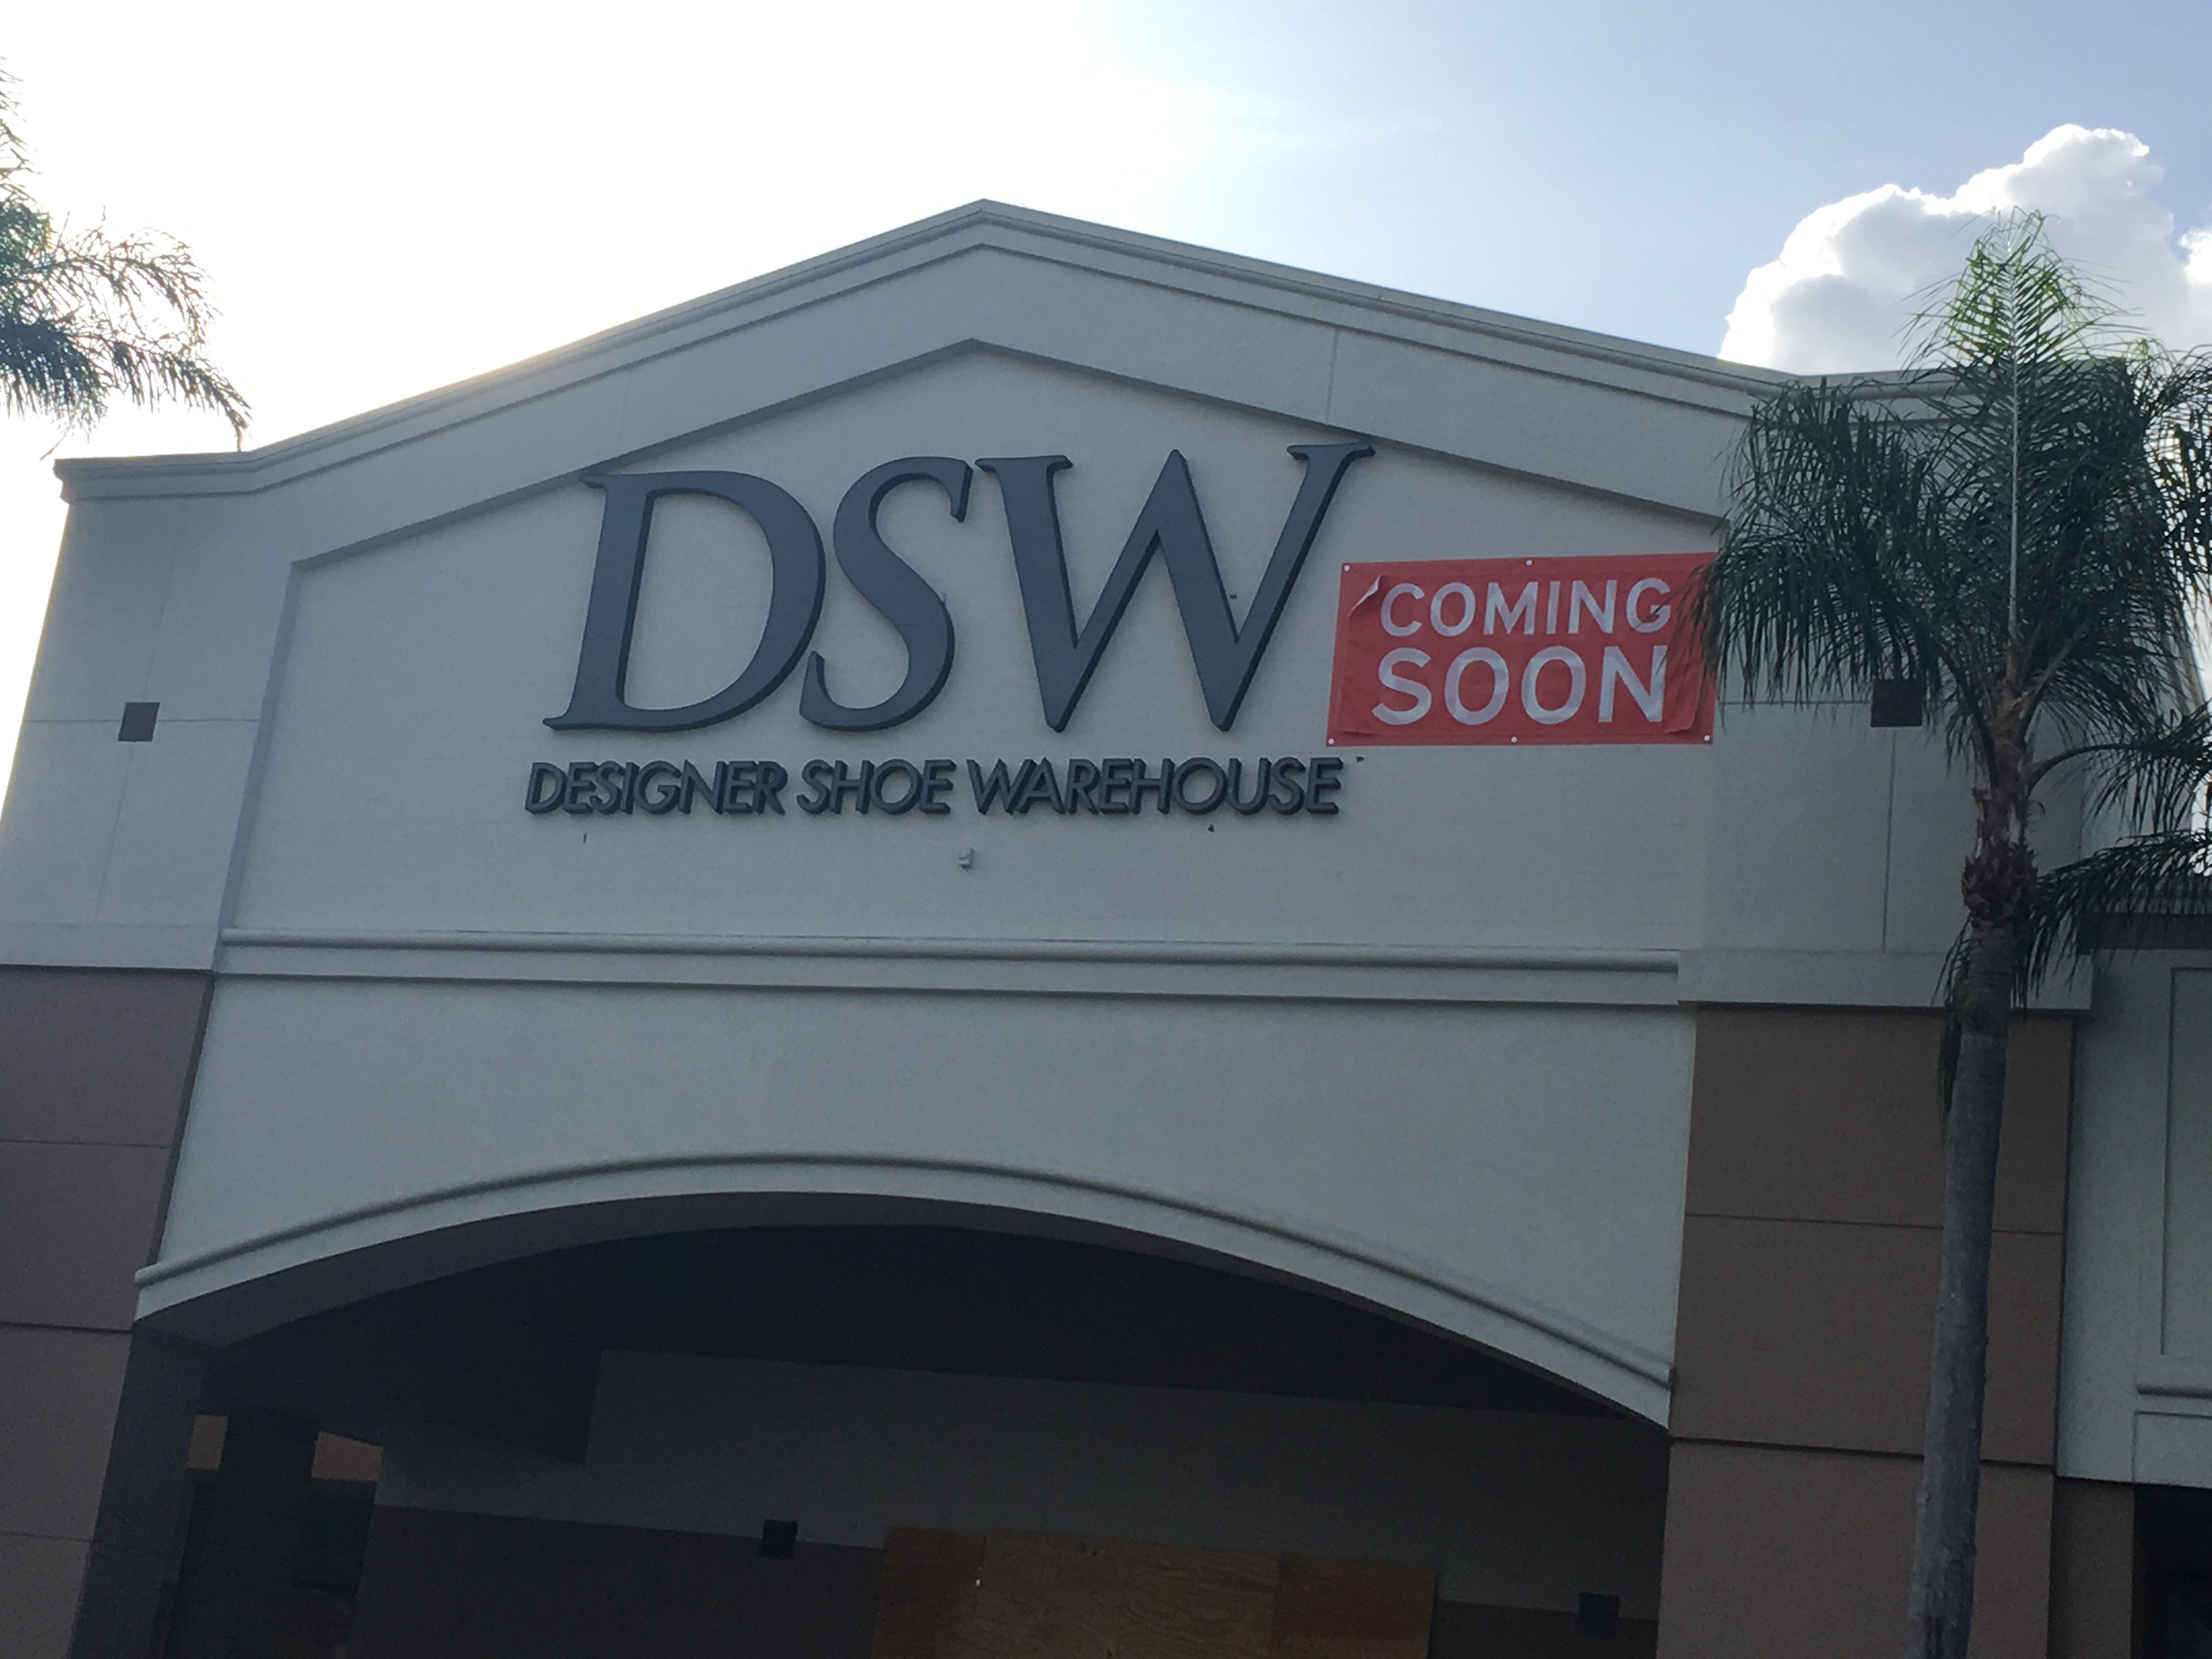 Looking at DSW. As one opens, another 